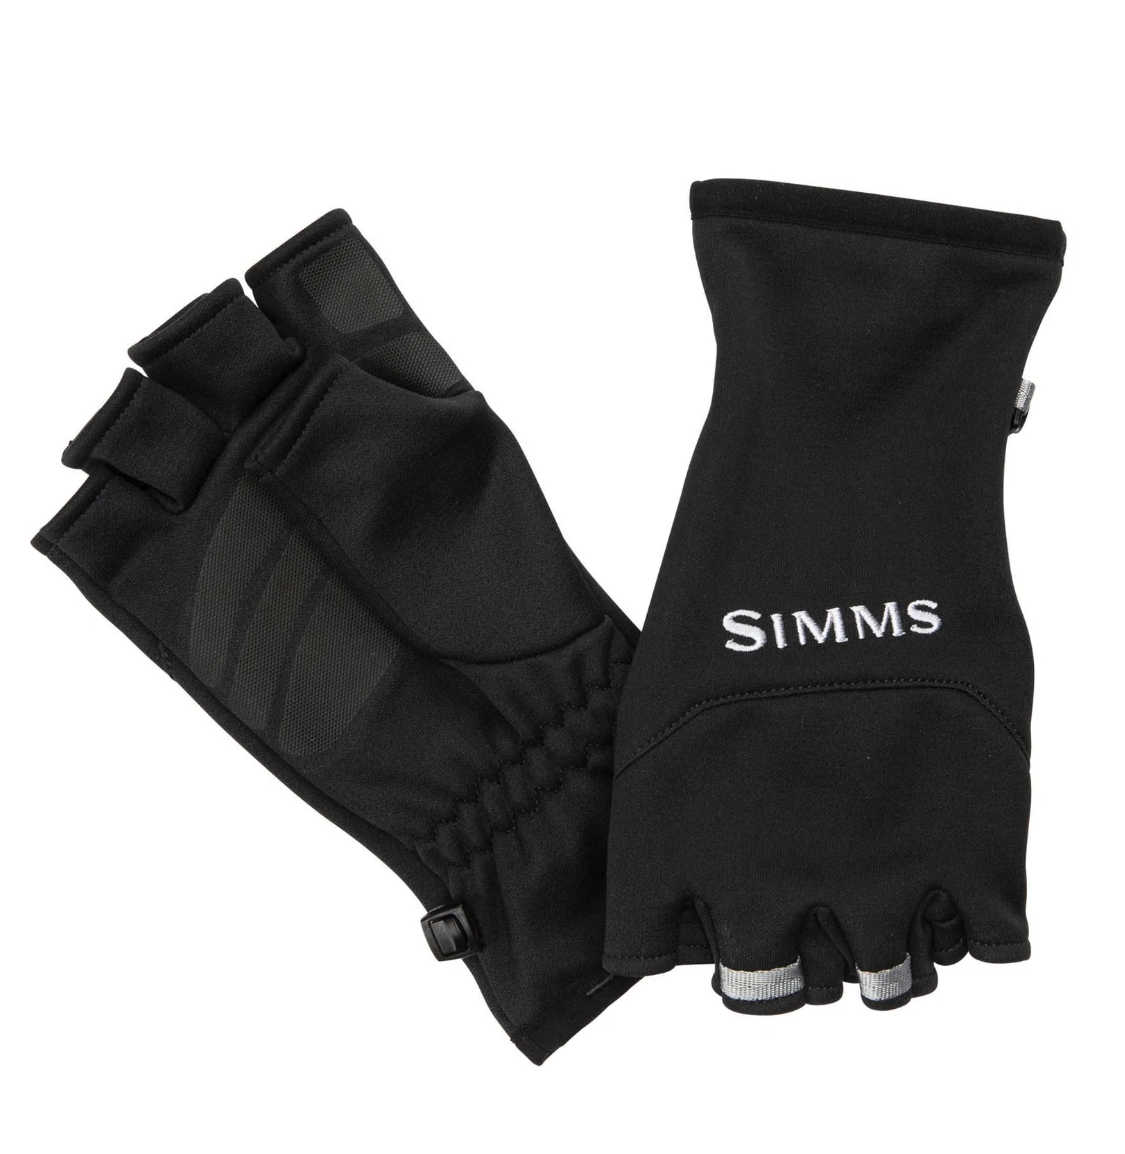 Simms Freestone Half Finger Gloves For Sale Online at TheFlyFishers.com